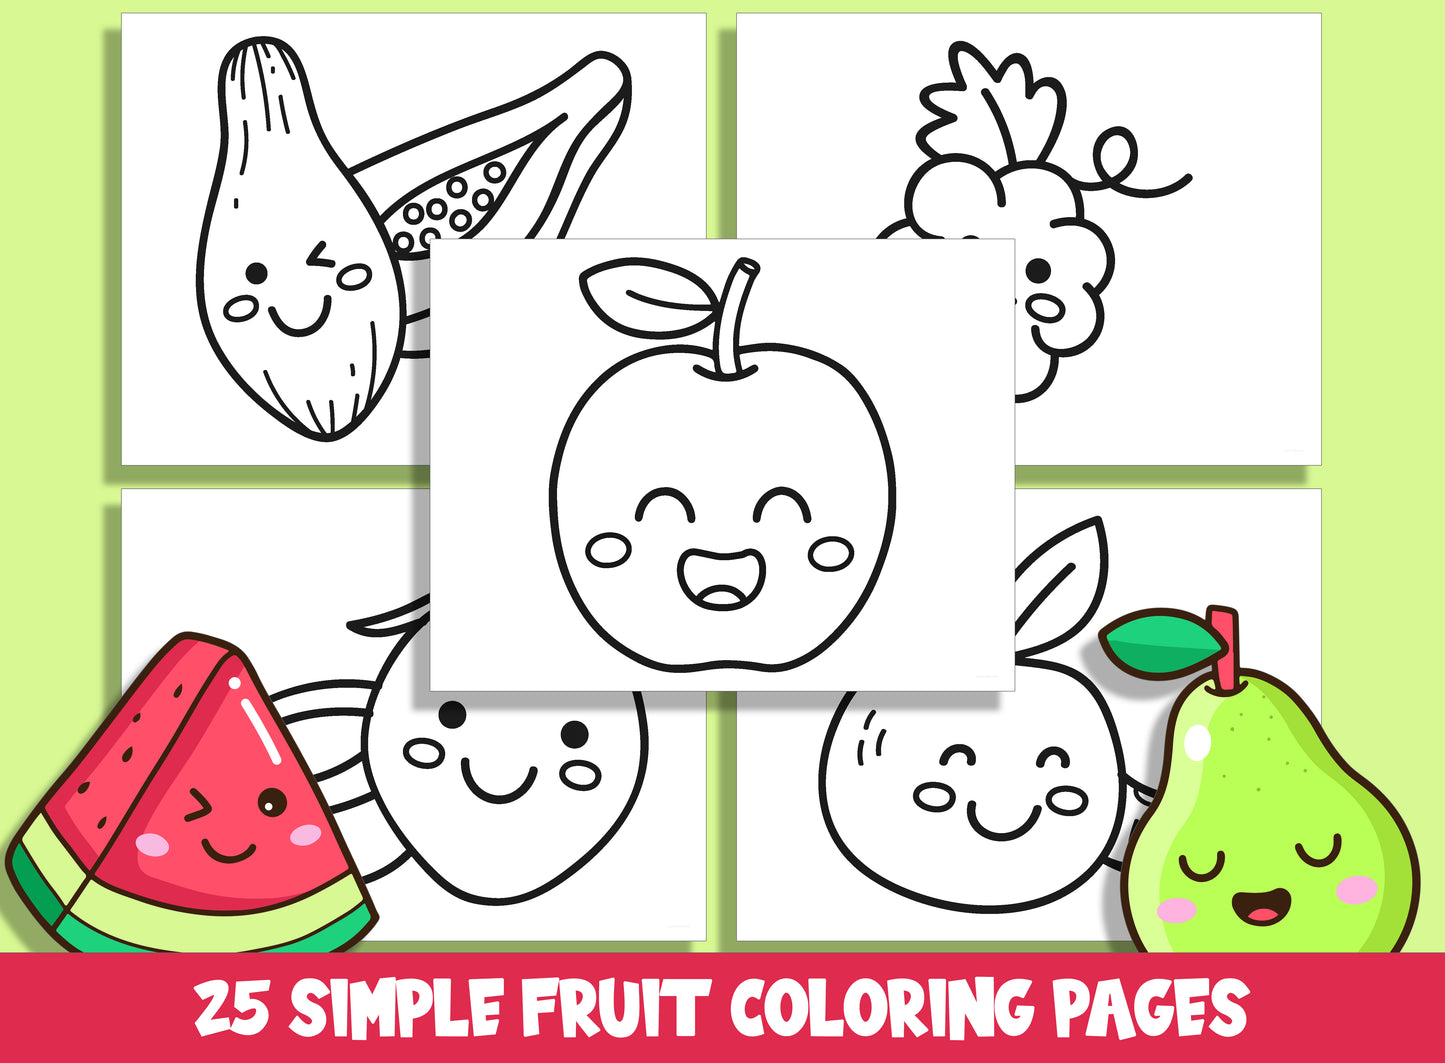 25 Cute and Simple Fruit Coloring Pages, Large Size, Thick Border, Perfect for Preschool & Kindergarten, PDF File, Instant Download